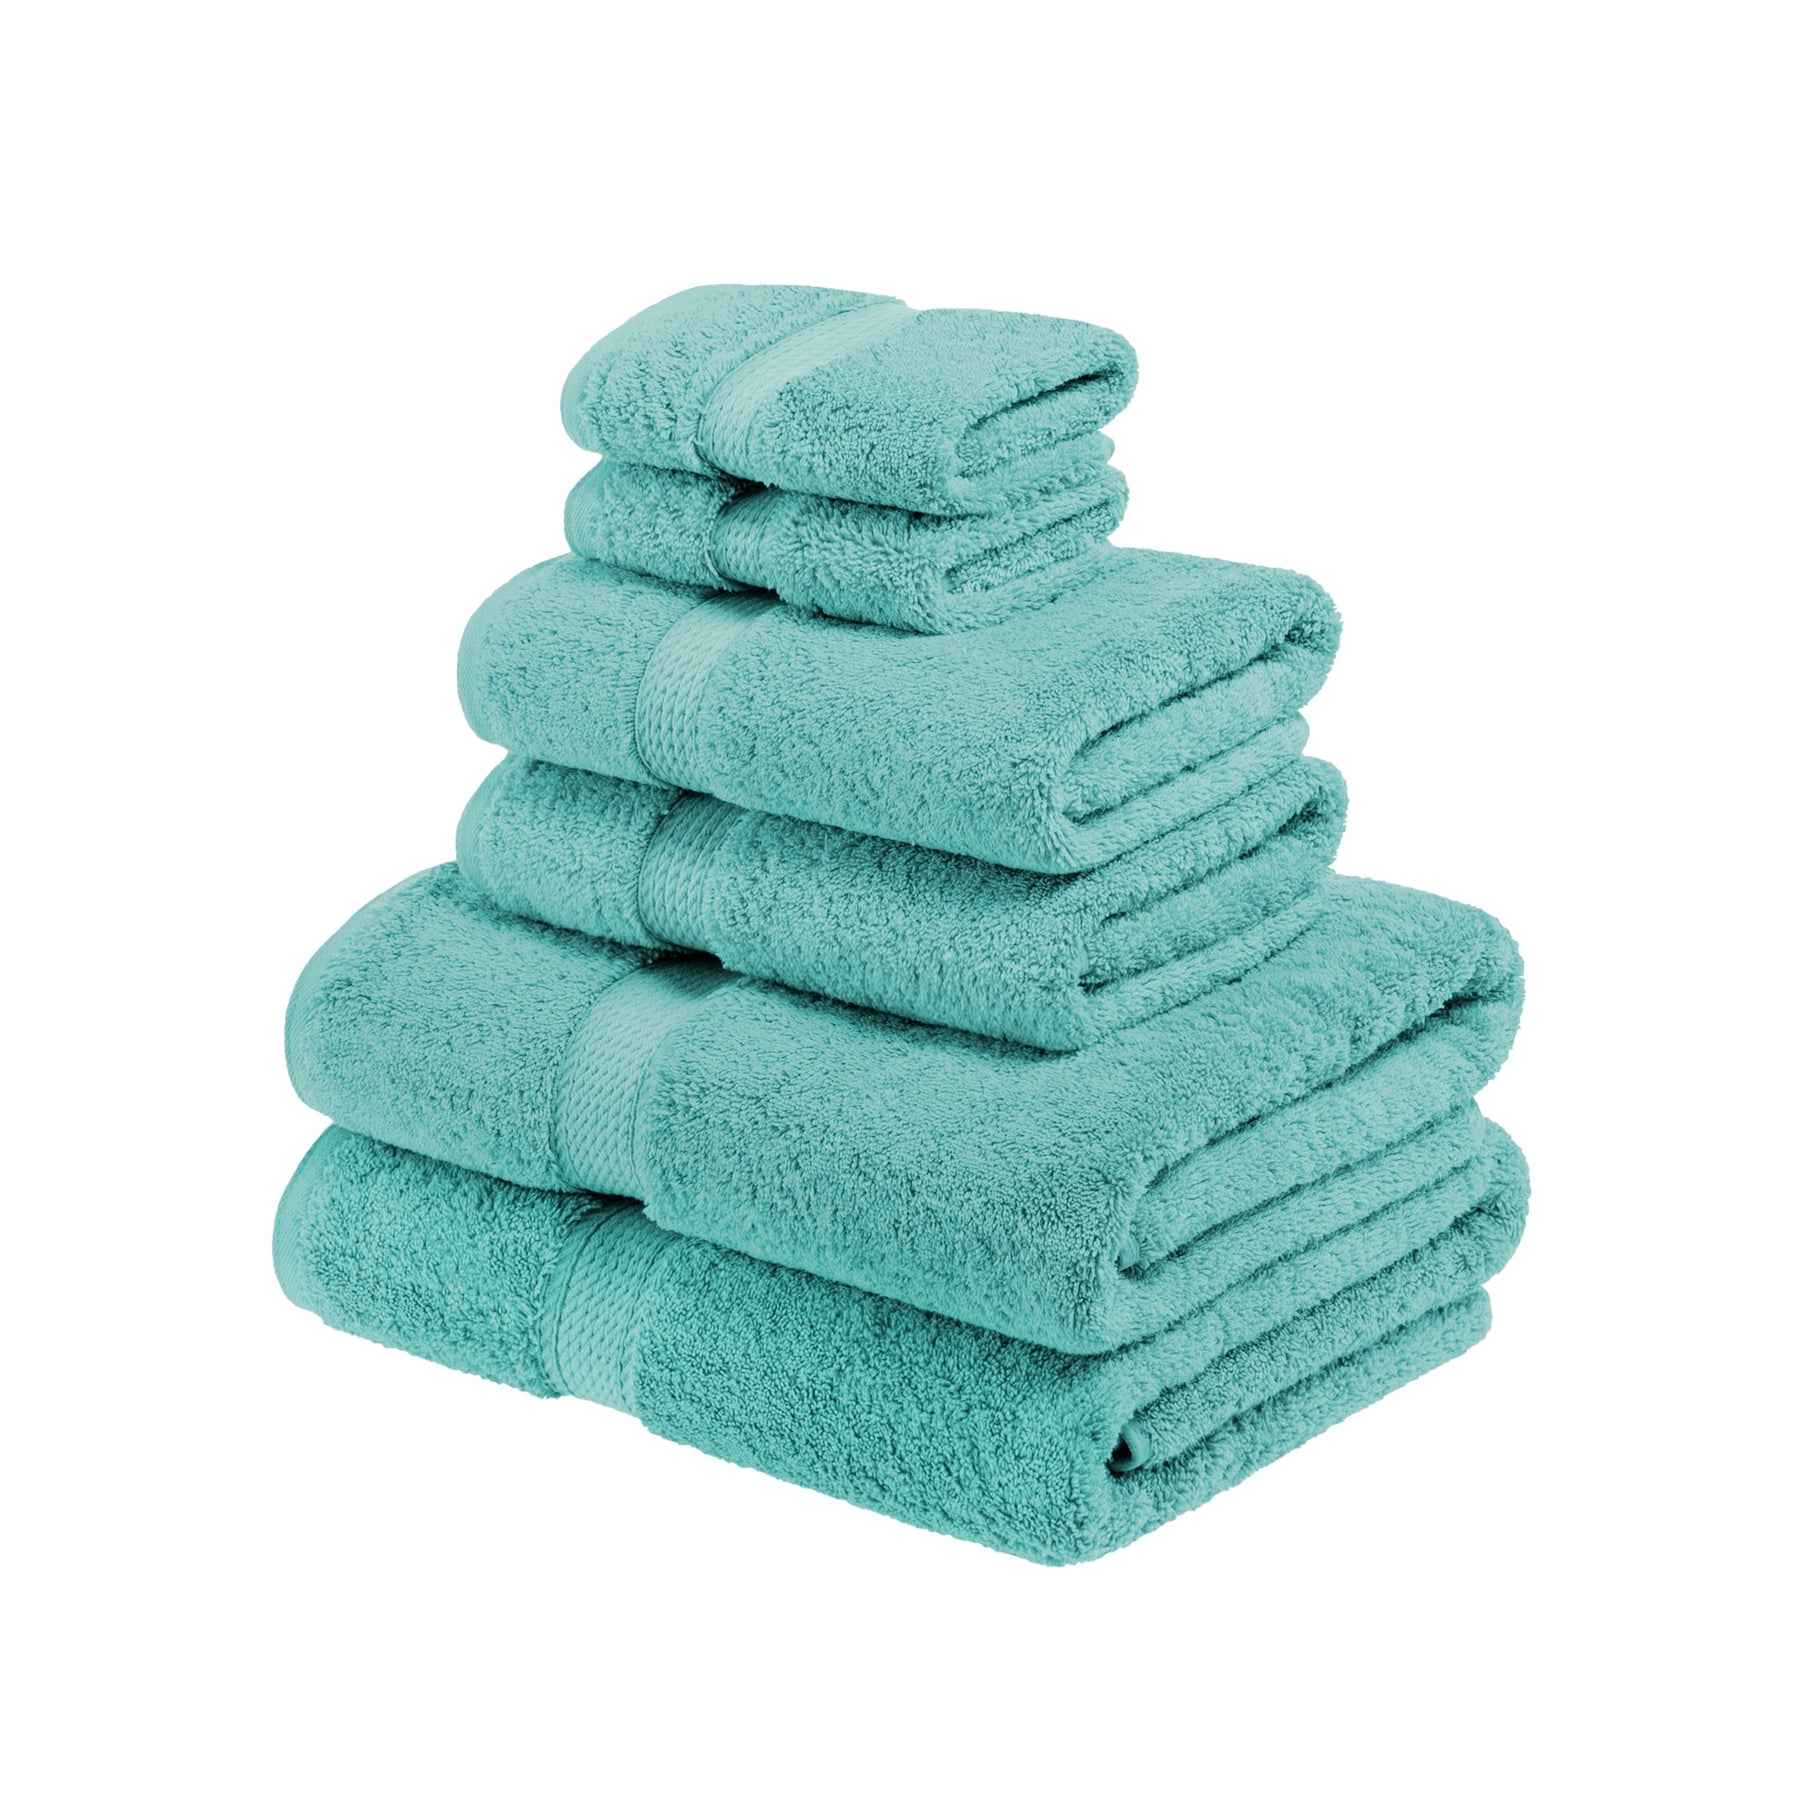 KEEPREAL 6 Pack Sea Turtle Washcloths Set - Highly Absorbent Pure Cotton  Wash Clothes - Soft Fingertip Towel for Bath, Spa